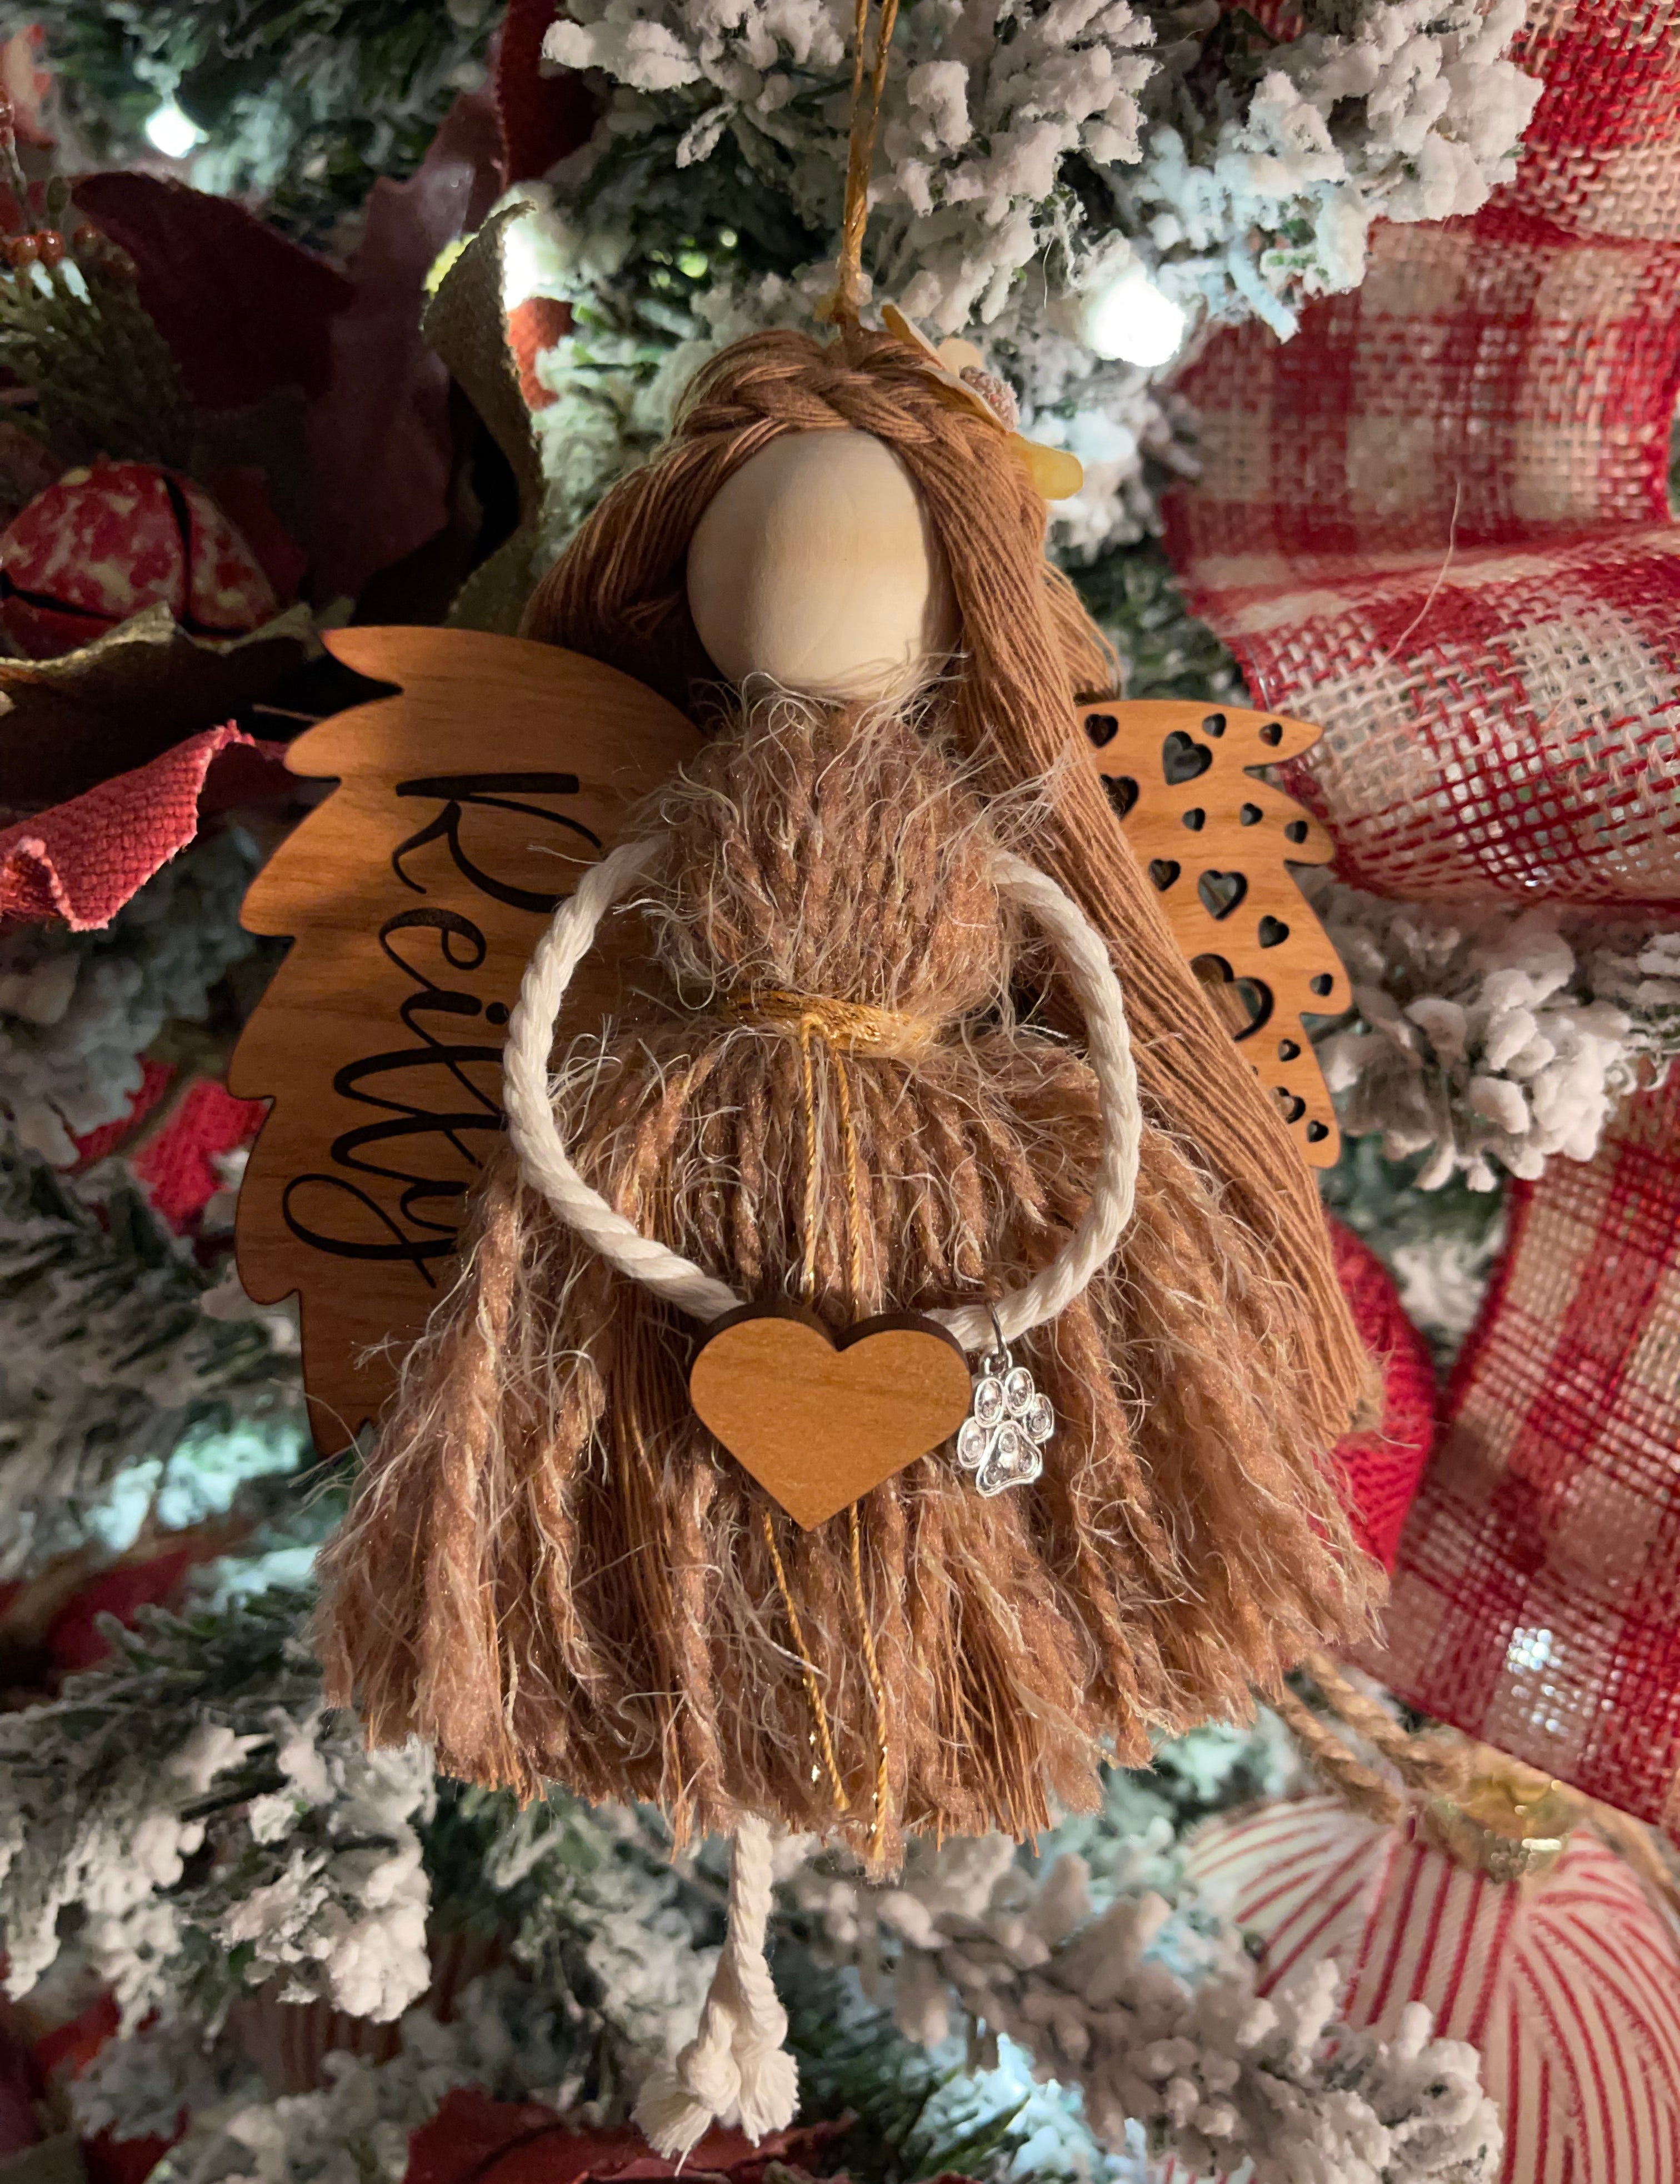 This image shows the angel hanging on a Christmas tree with the engraved name Reilly. The angel is holding a wooden heart and has a paw charm on the arm.